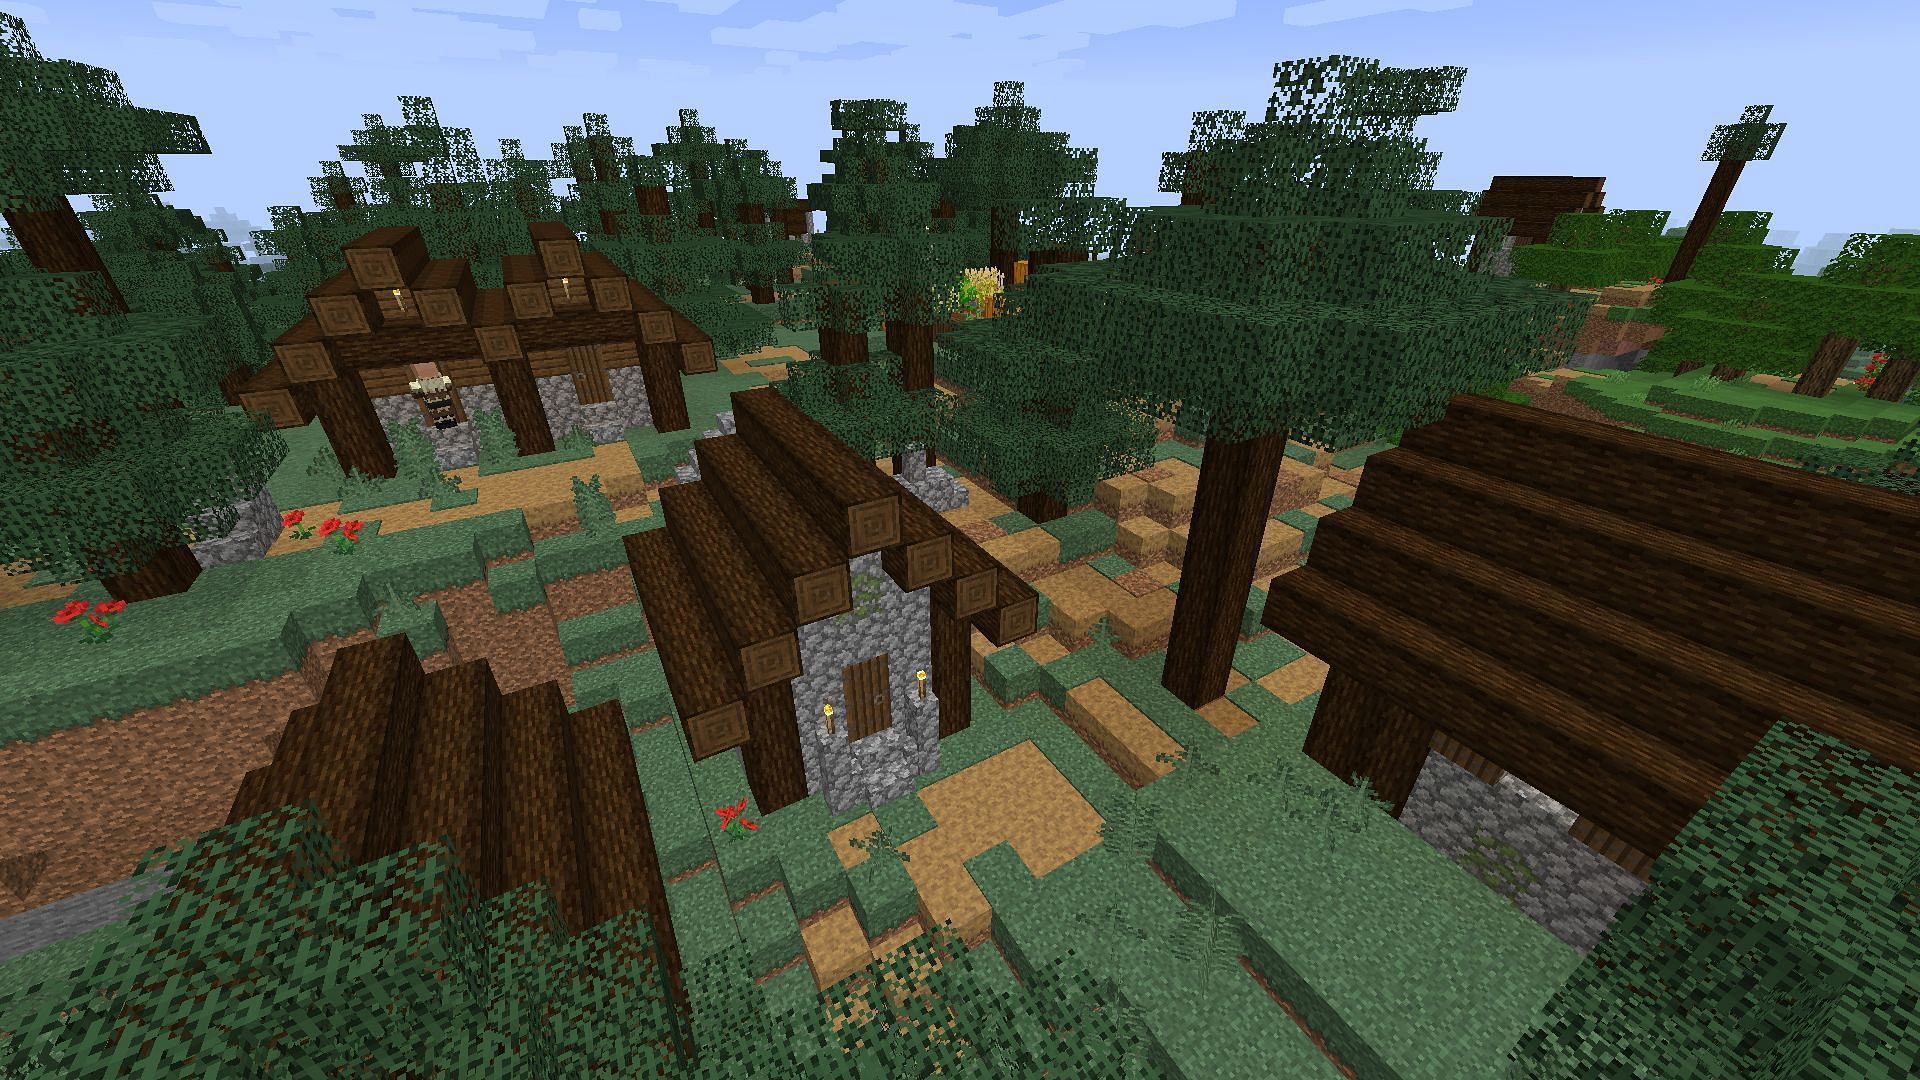 The village with the BetterVanillaBuilding texture pack on (Image via Minecraft)